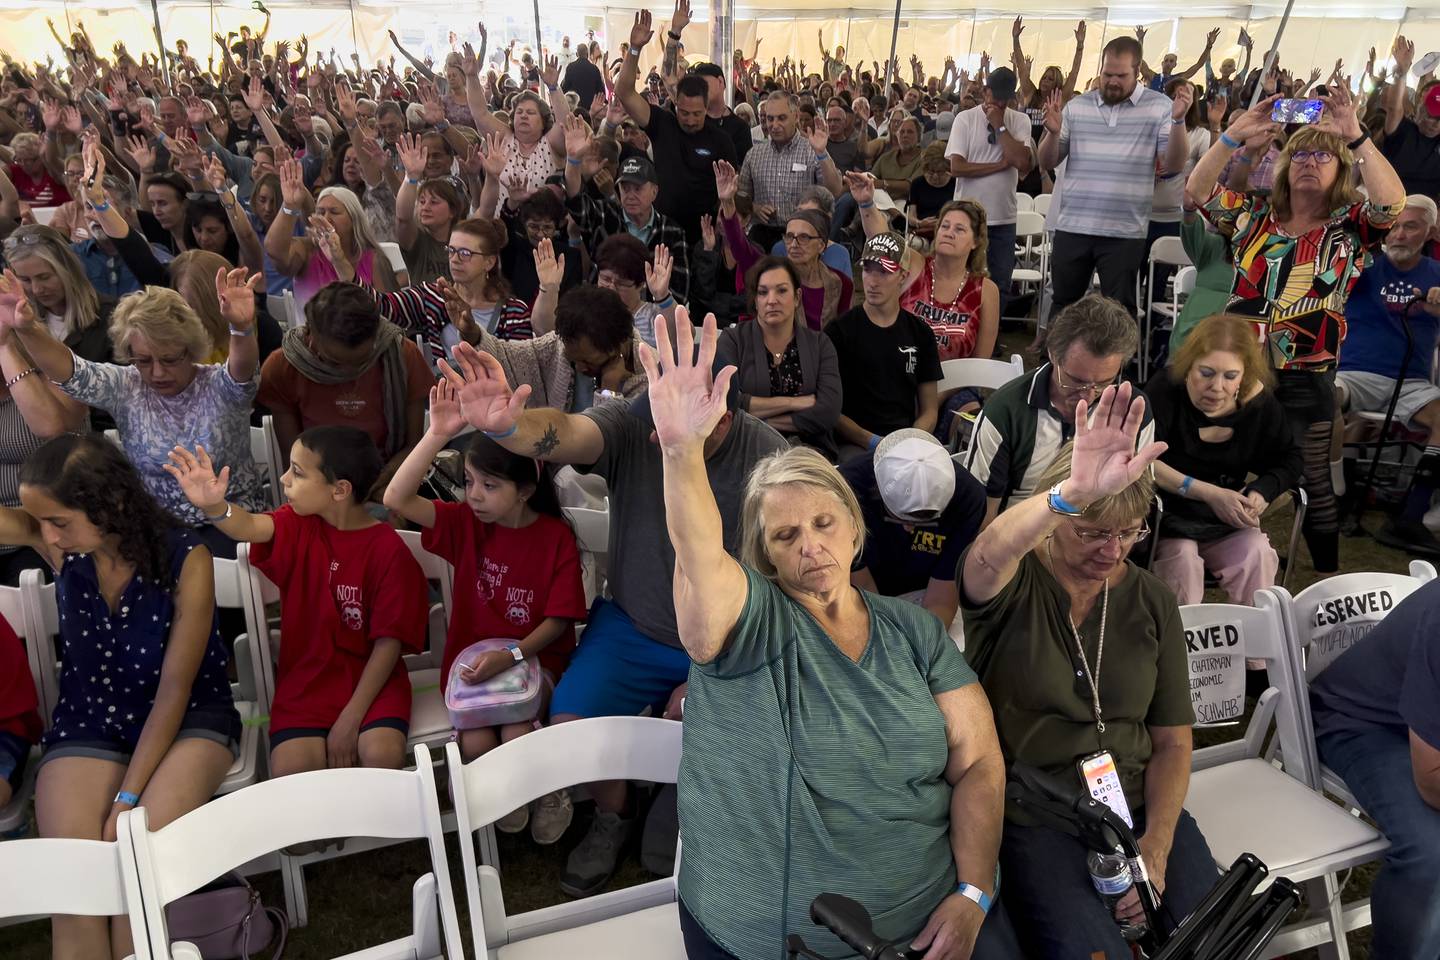 Attendees raise their hands as they worship inside the tent during the ReAwaken America tour at Cornerstone Church, in Batavia, N.Y., Friday, Aug. 12, 2022.